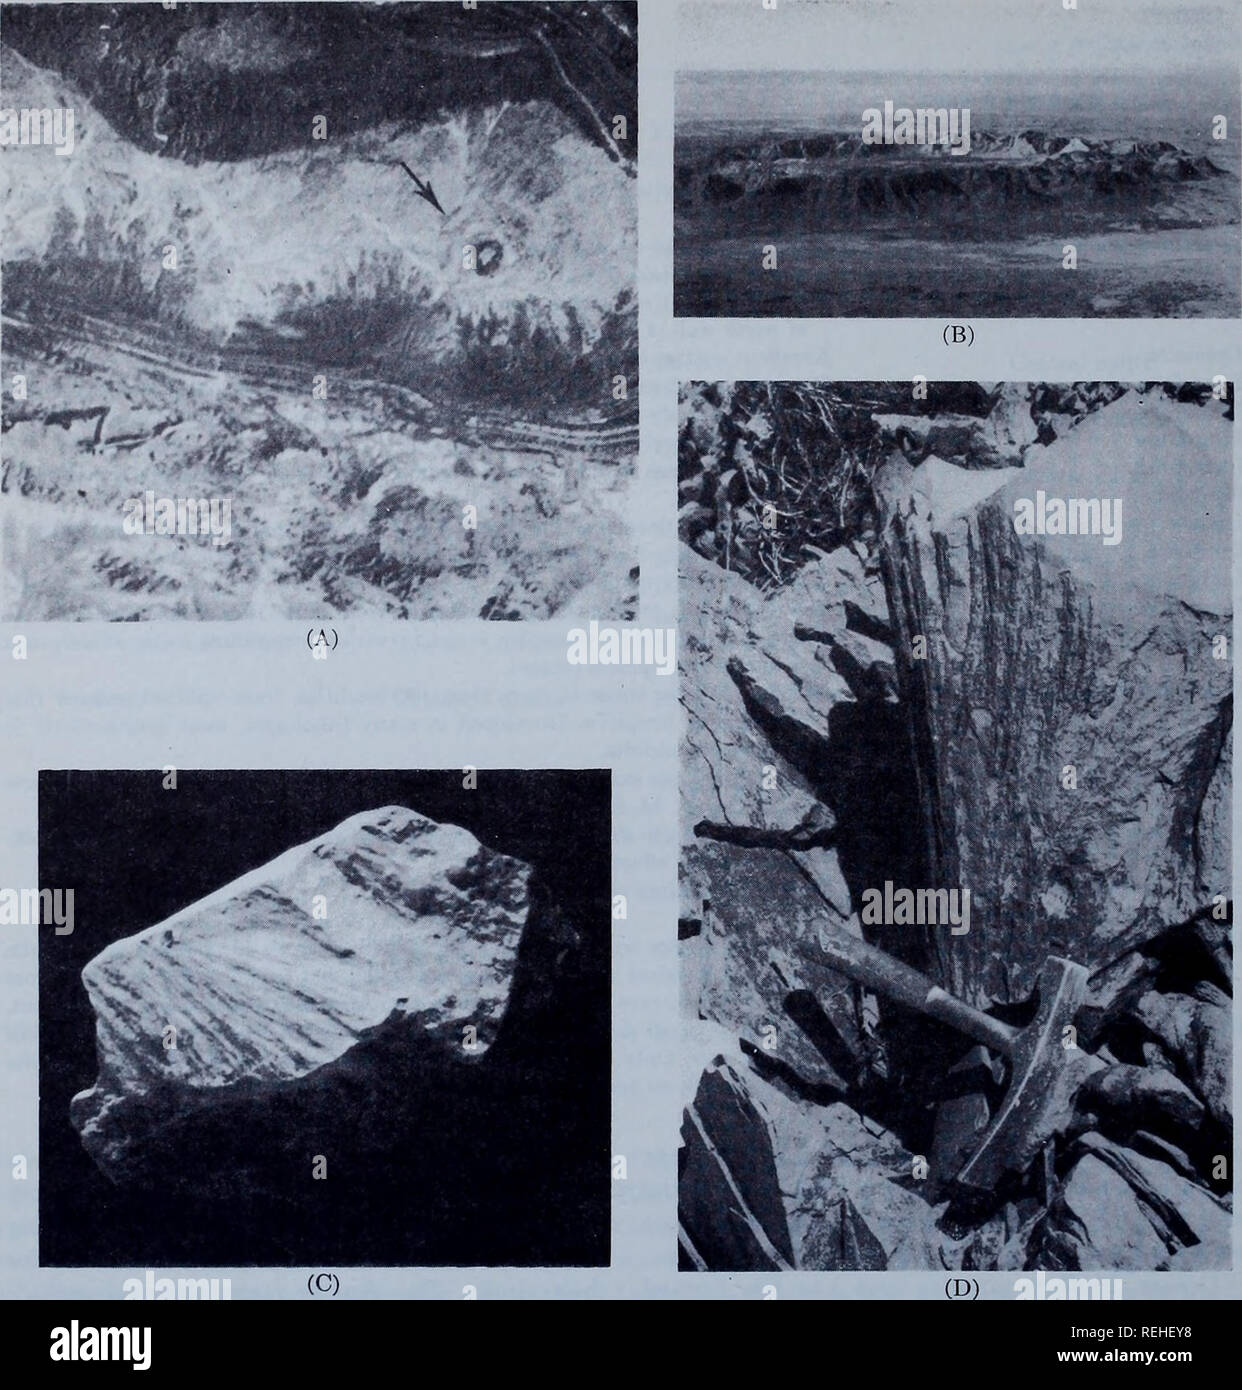 . Collected reprints / Atlantic Oceanographic and Meteorological Laboratories [and] Pacific Oceanographic Laboratories. Oceanography Periodicals.. 274 SHOCK .METAMORPHISM OF NATURAL MATERIALS. Plate III—Gosses Bluff Cryptoexplosion Structure, Australia A. Gemini IV space photo (no. V-2-22) giving a view B. Aerial oblique view of Gosses Bluff in central Aus- of Gosses Bluff from near space. Central uplift (dark ring) tralia showing the central uplift of the cryptoexplosion about 3 miles across is surrounded by an outer ring syn- structure which is presumably an astrobleme. Photo from cline (gho Stock Photo